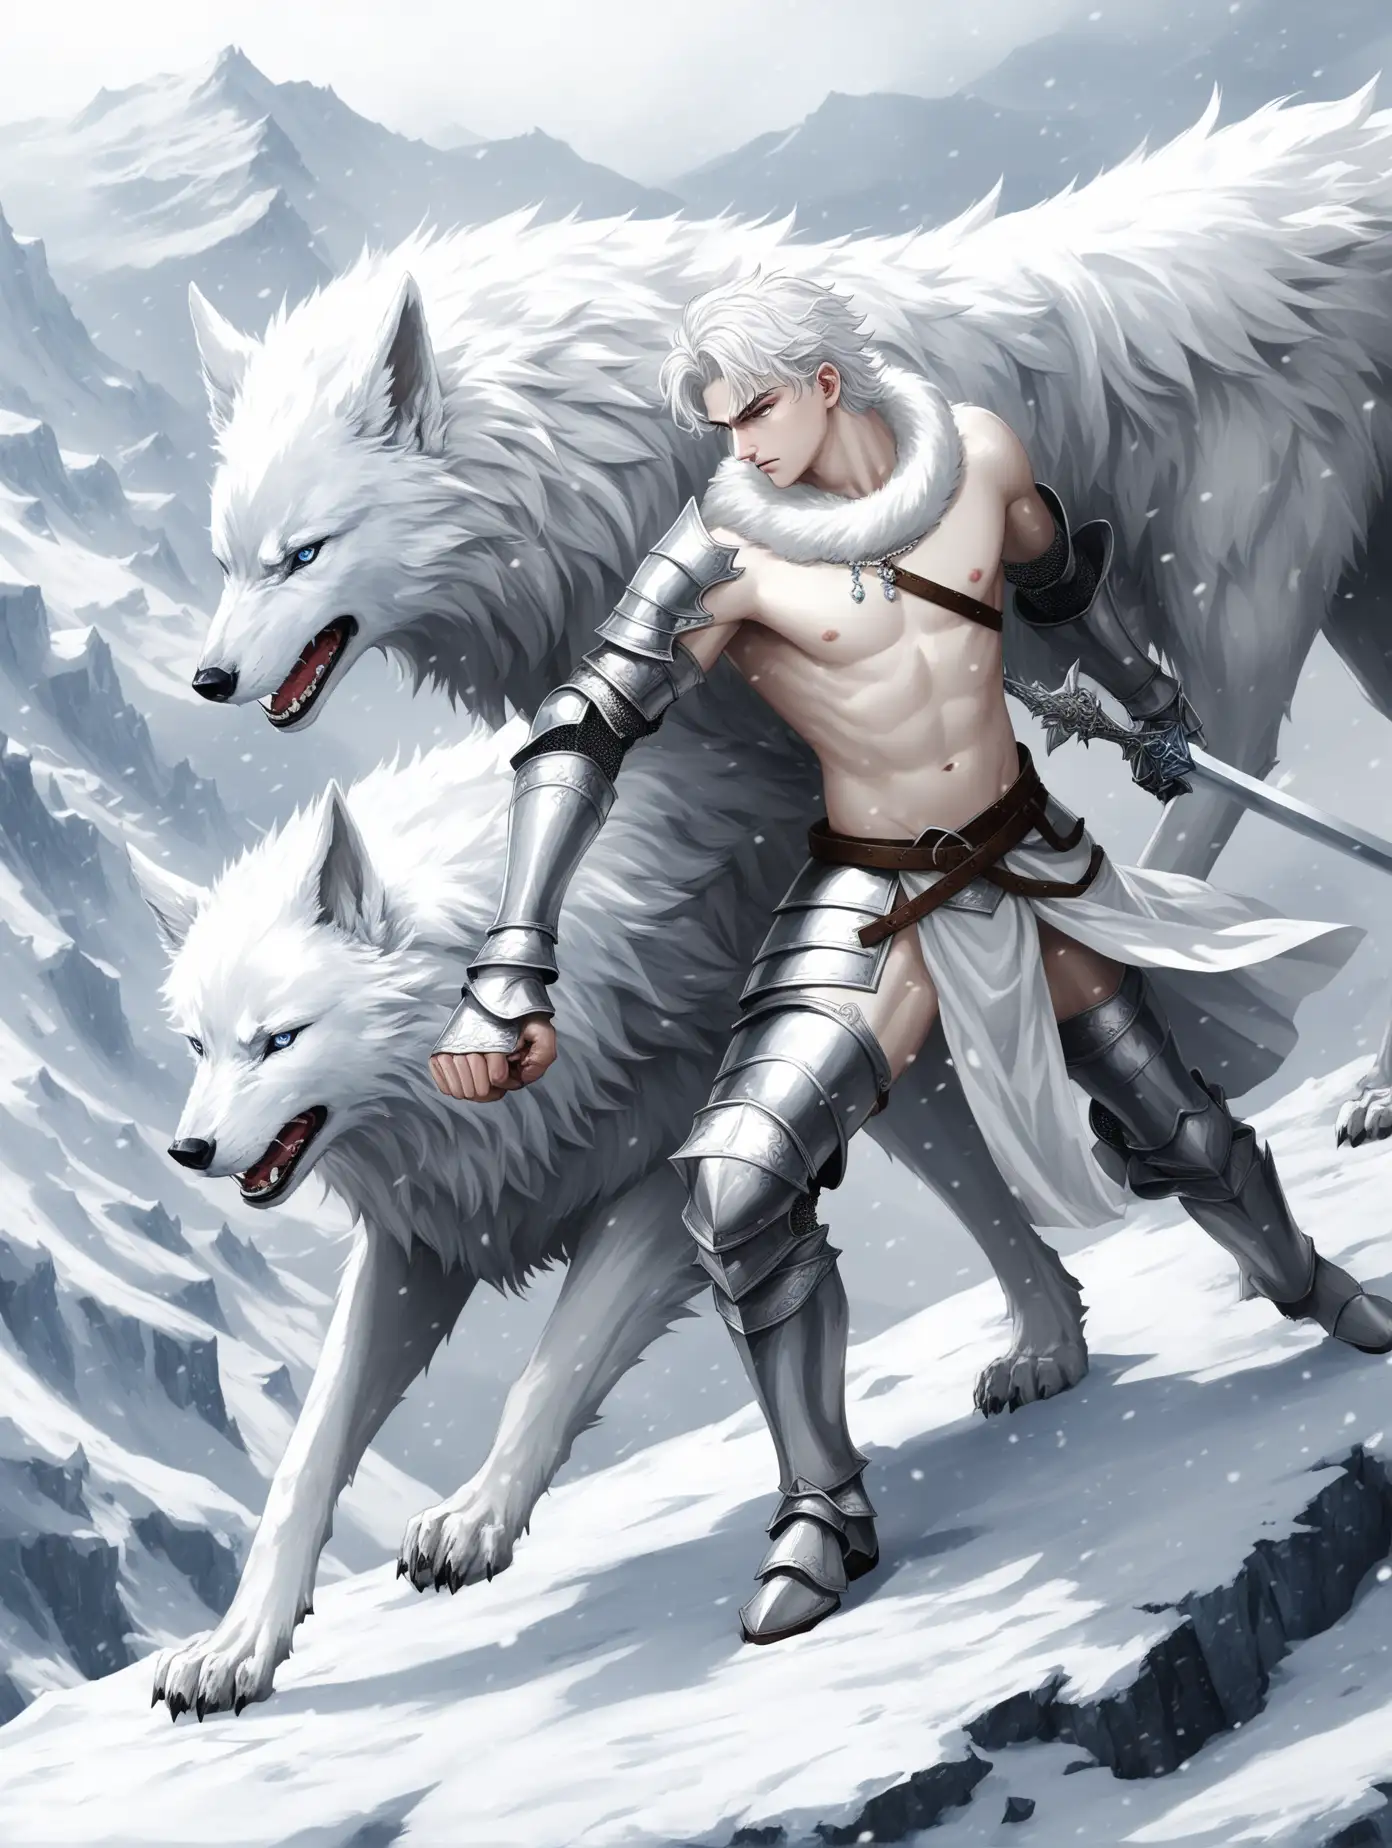 A 16 year old European male knight wearing white fur, shirtless, white hair, white skin, white boots, silver jewelry, fighting with a white wolf, on a snowy mountain